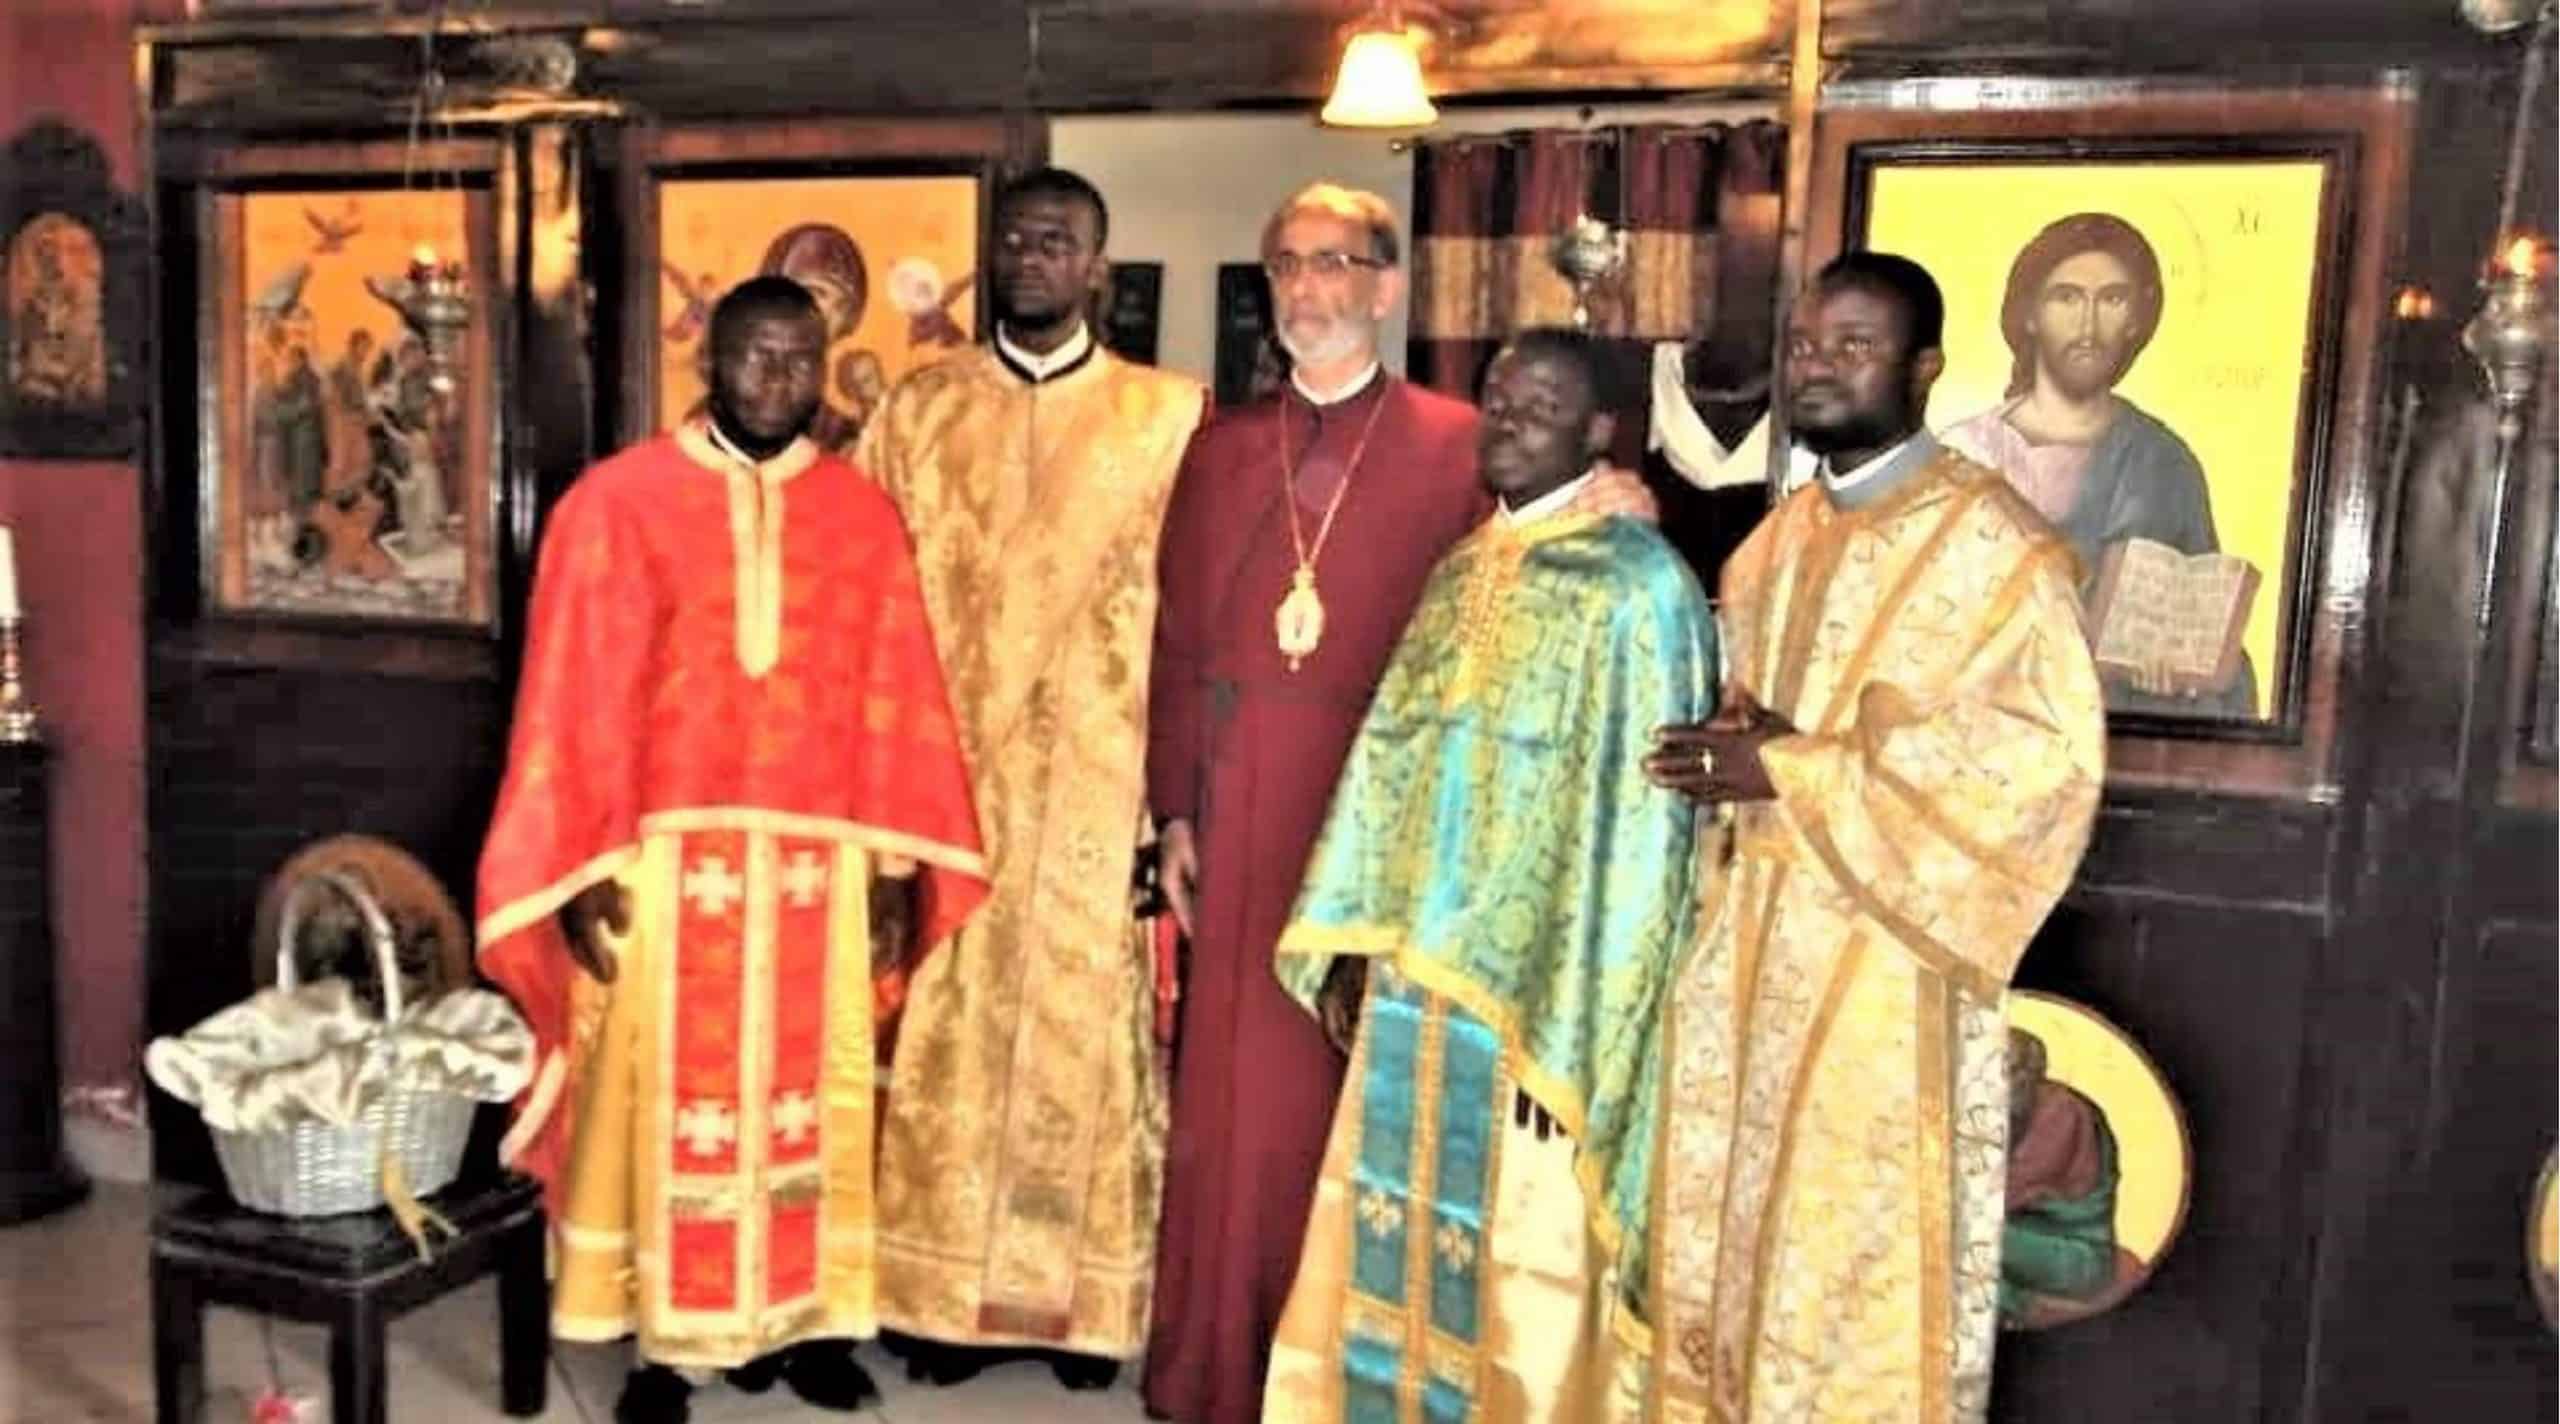 Orthodoxie en afrique – bulletin d’informations « orthodoxia »